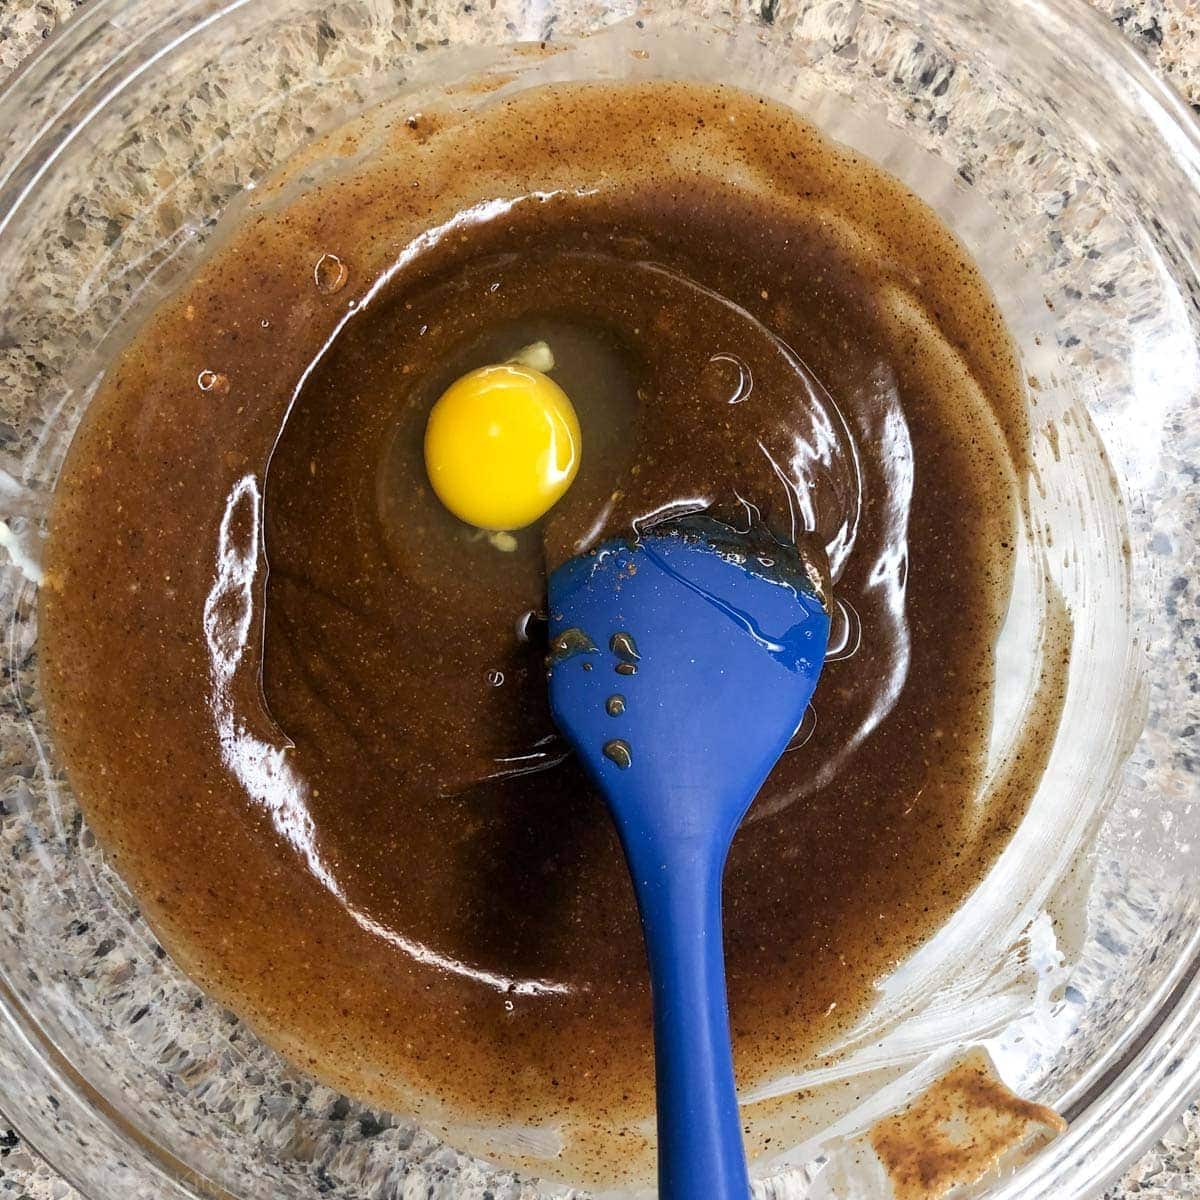 Egg added to bowl of ingredients